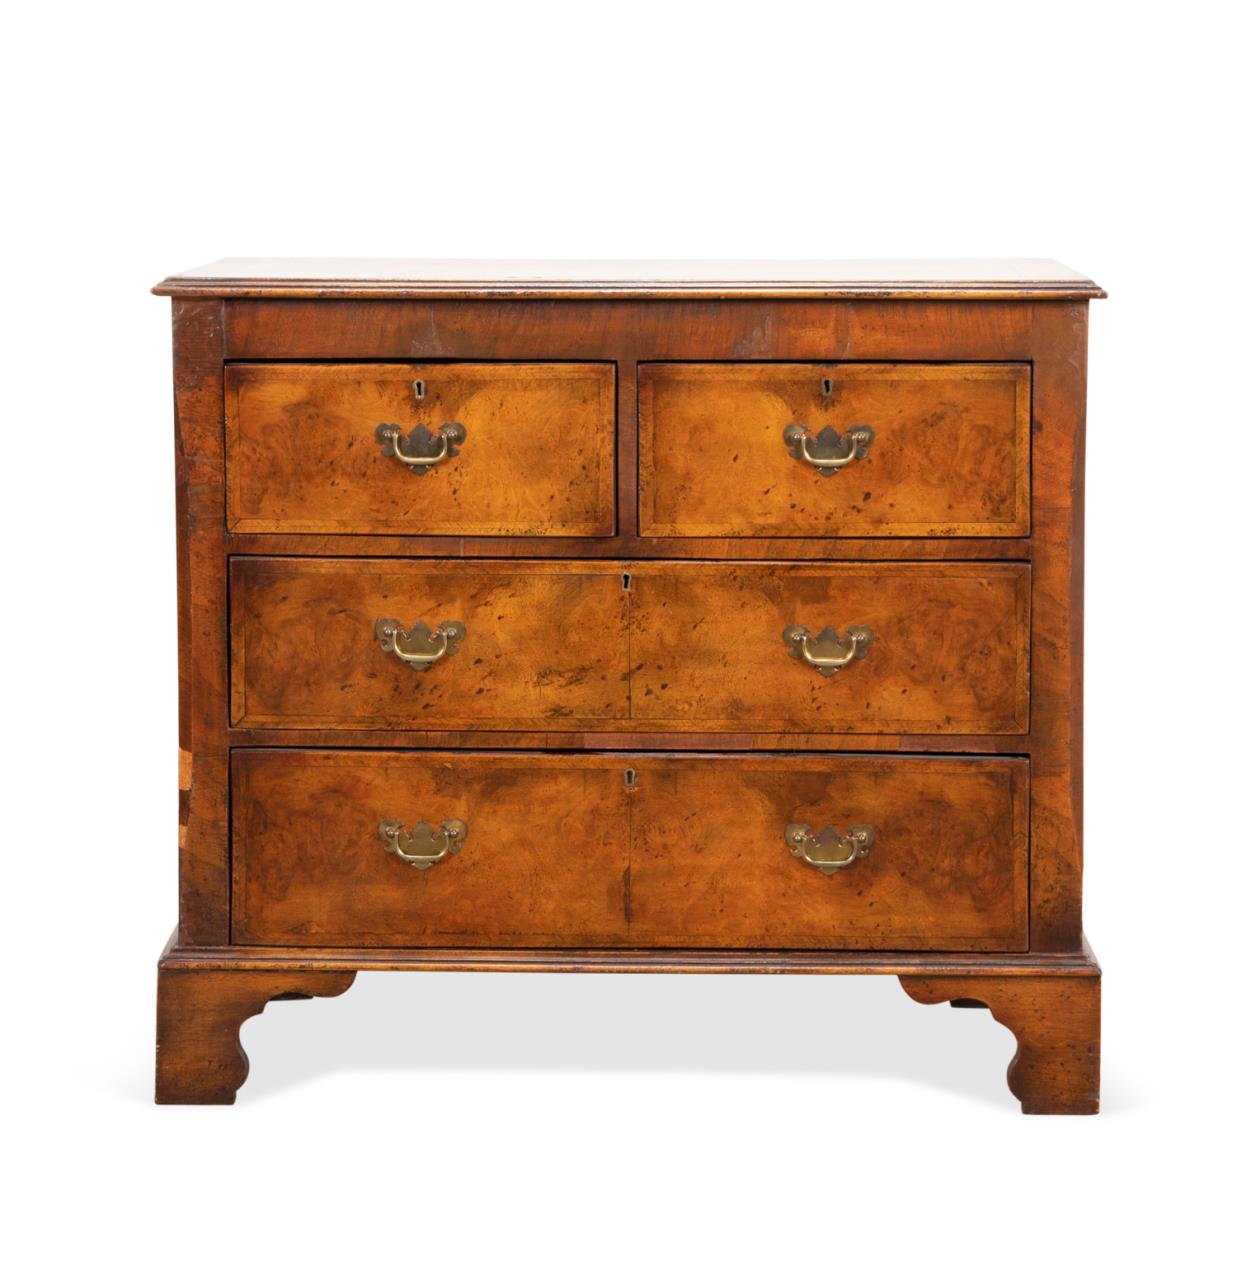 CHIPPENDALE STYLE WALNUT CHEST 2f9c52